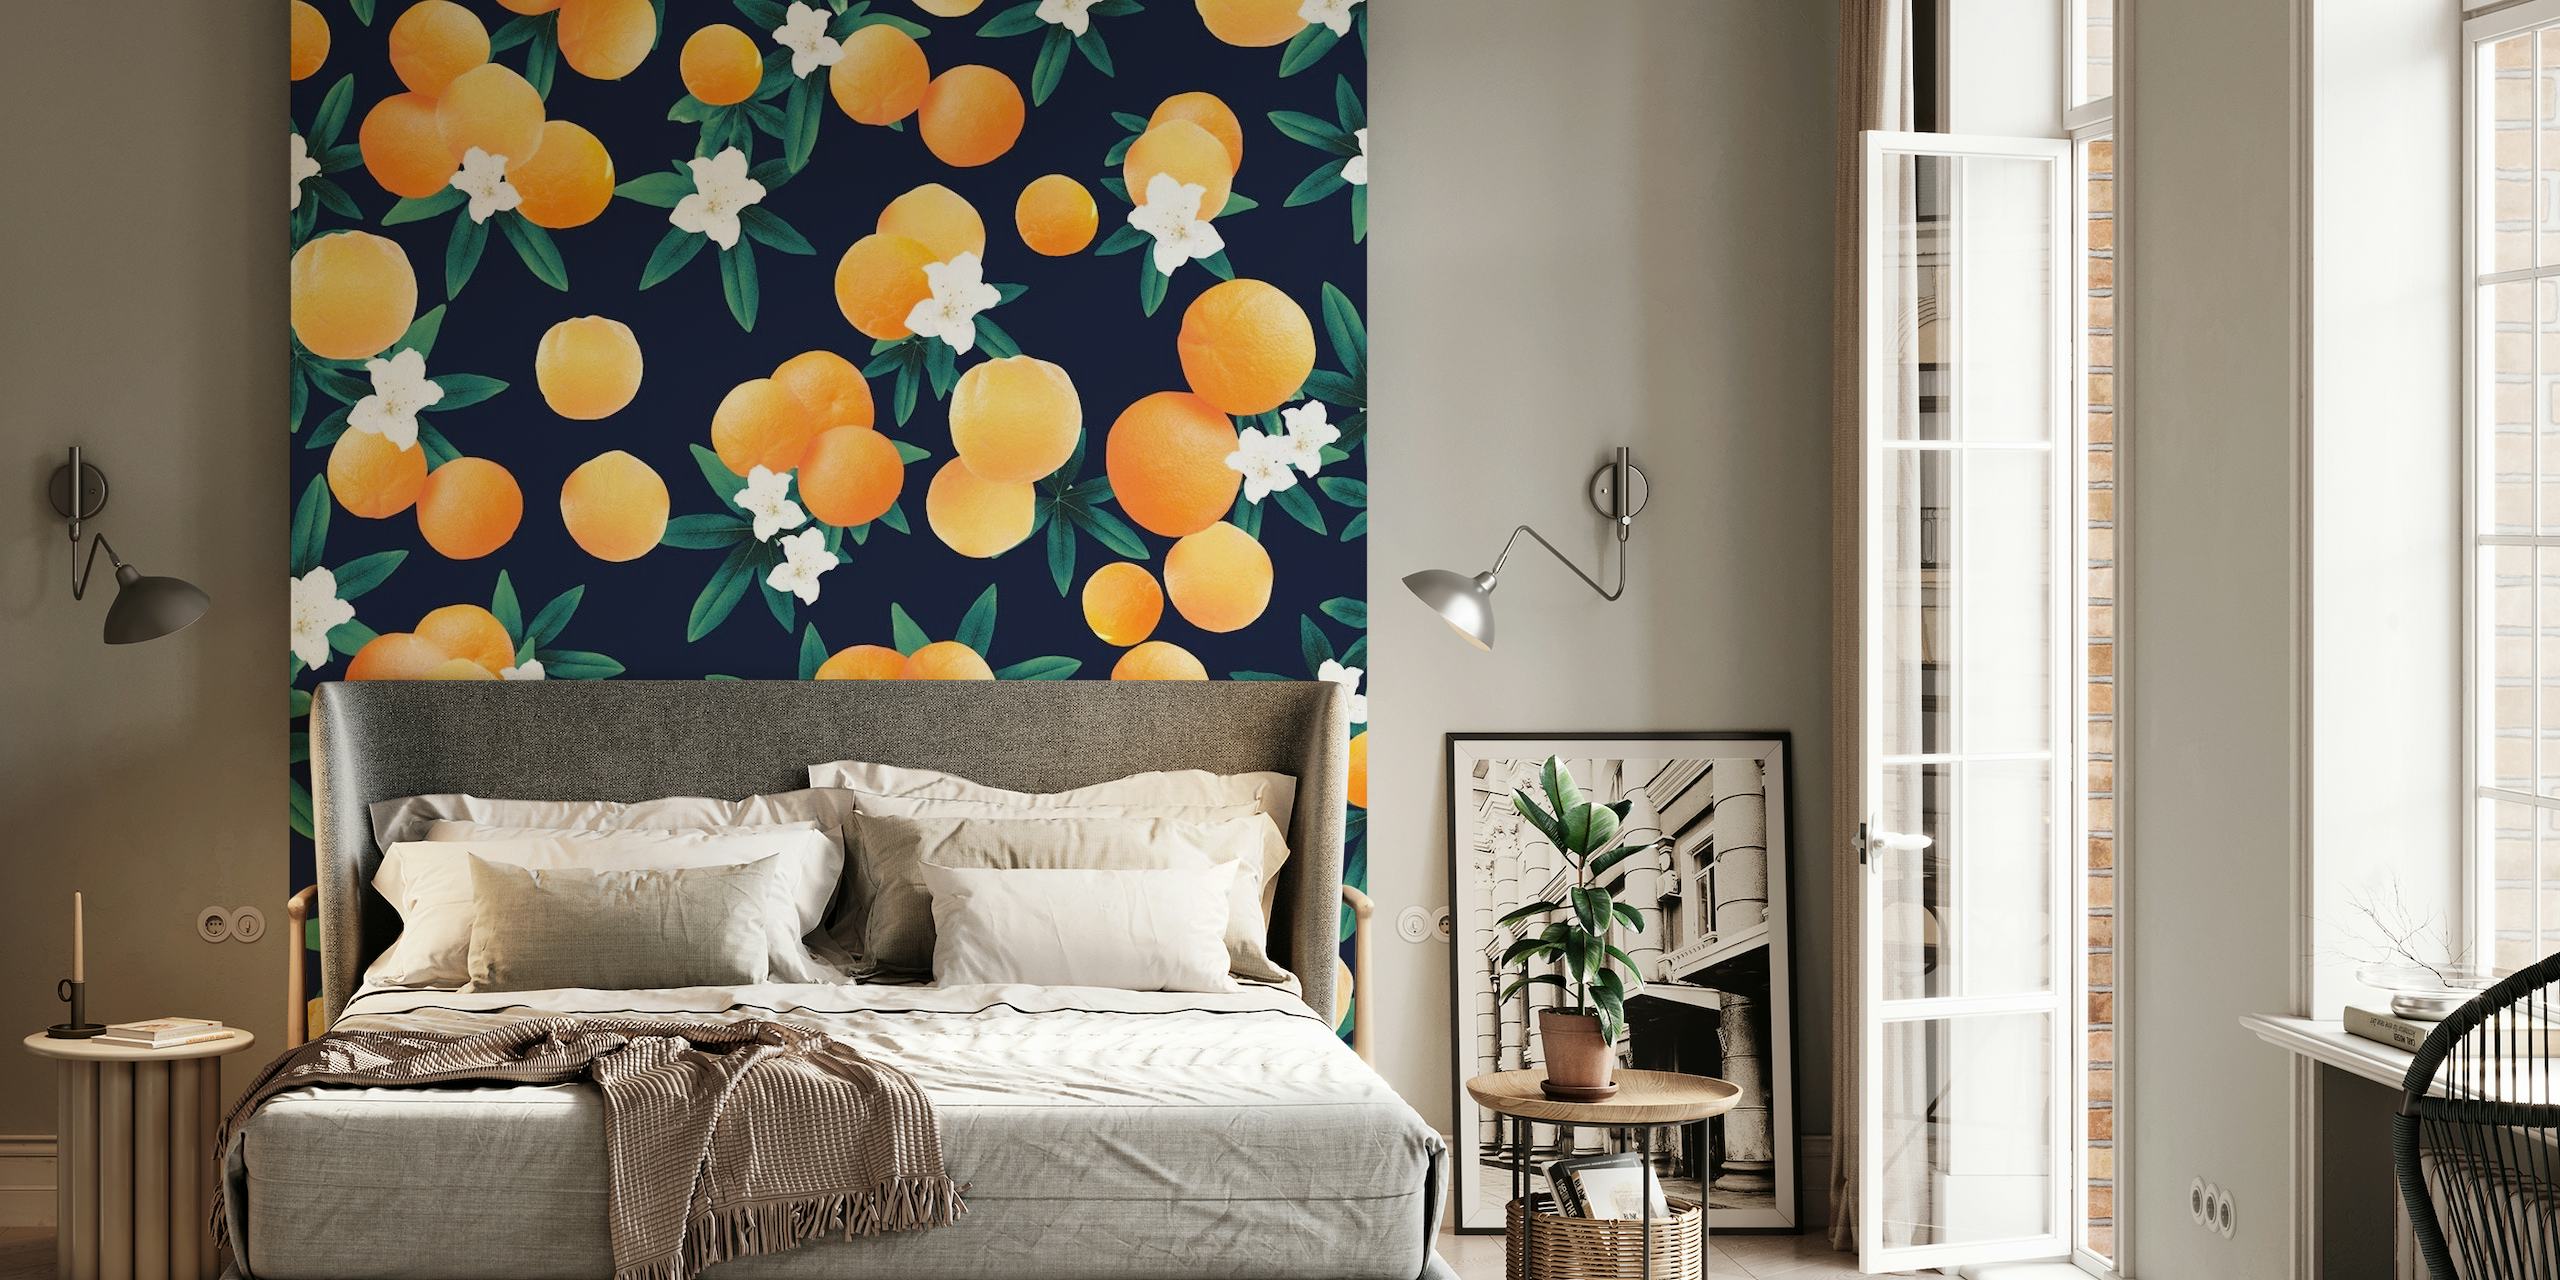 Wall mural featuring bright orange citrus fruits and white flowers against a dark blue background.